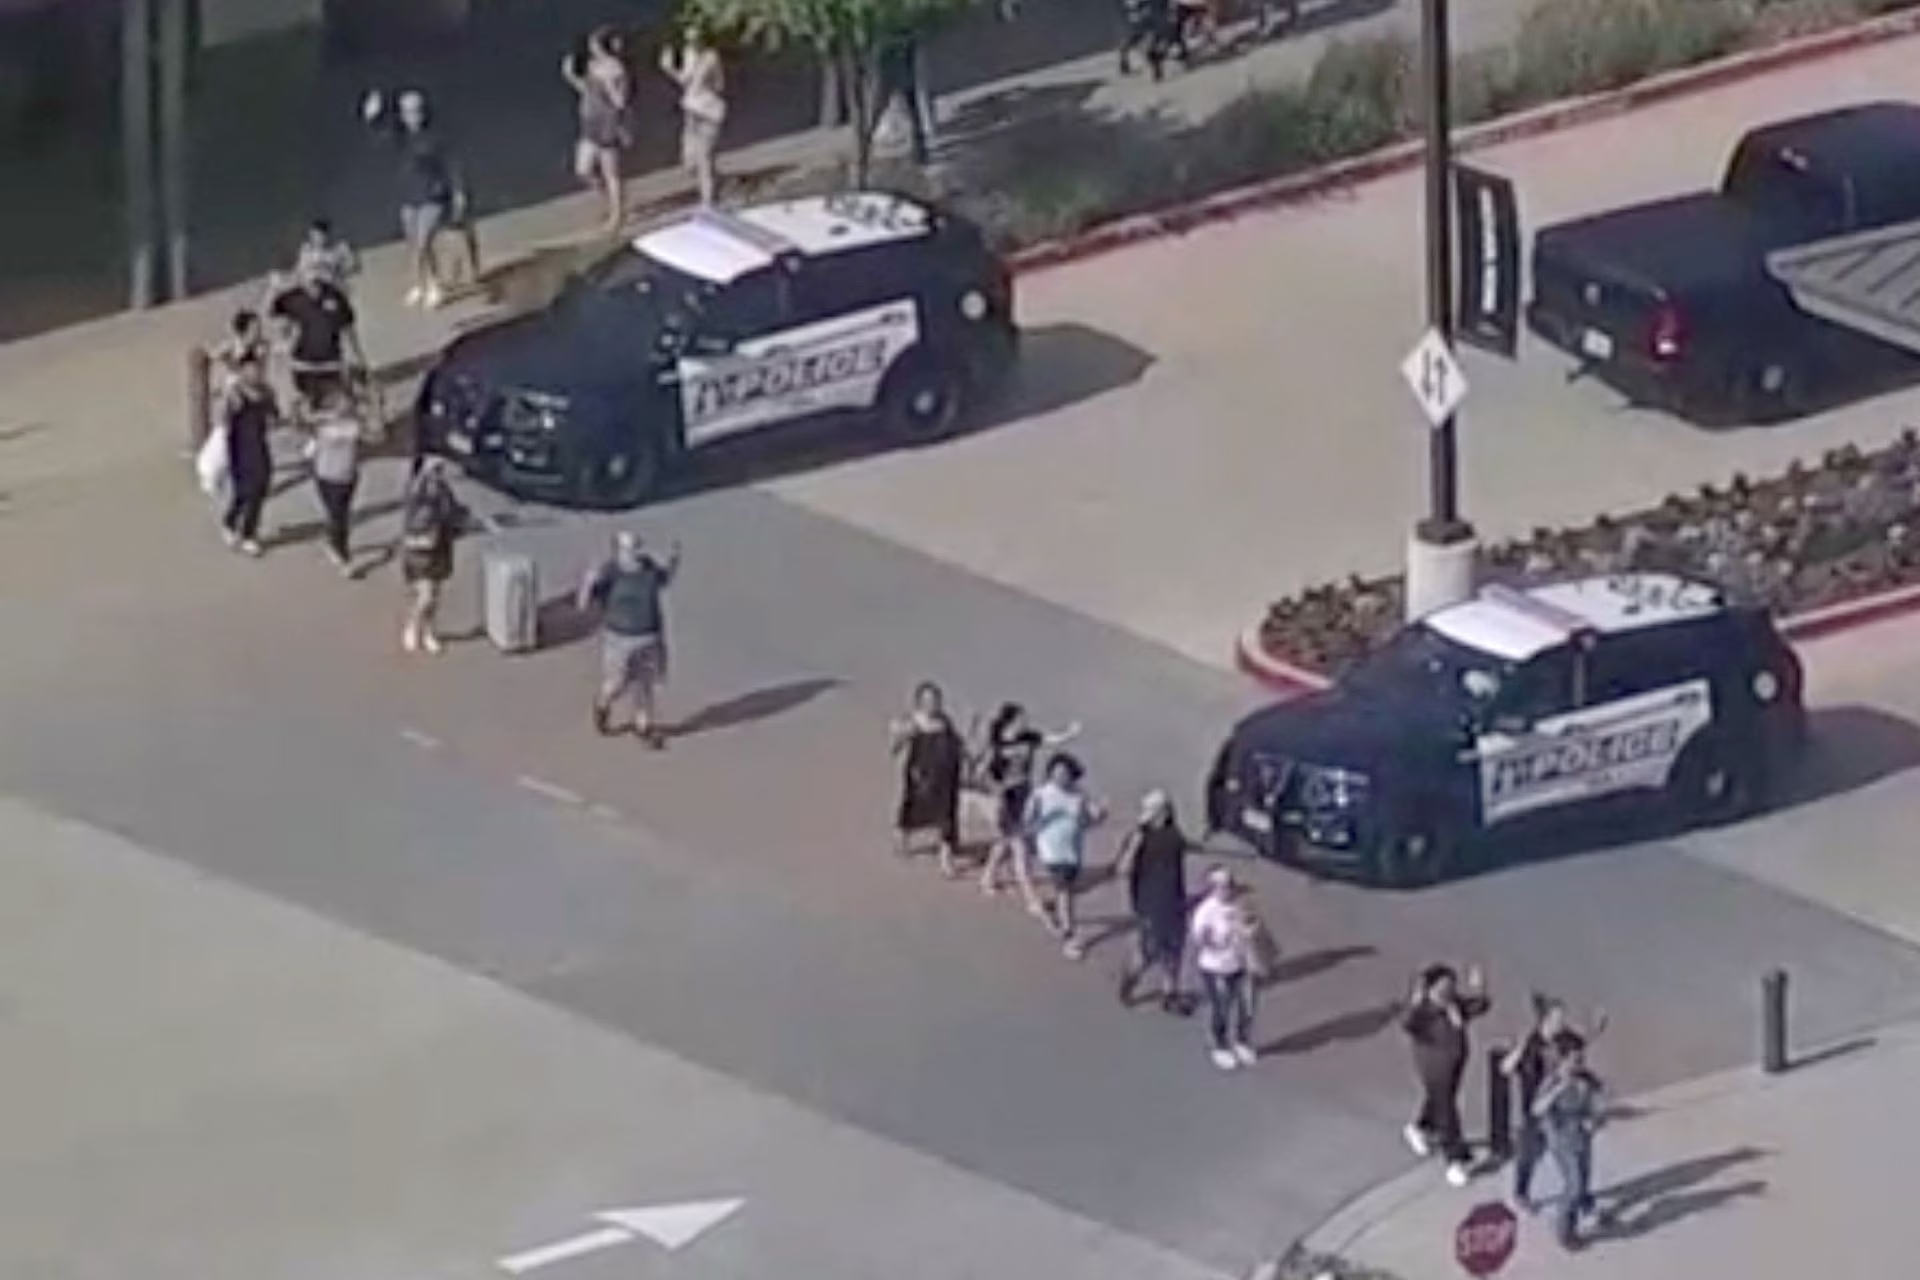 Shoppers leave with hands up as police respond to a shooting in the Dallas area's Allen Premium Outlets, which authorities said has left multiple people injured in Allen, Texas, U.S. May 6, 2023 in a still image from video. Photo: Reuters